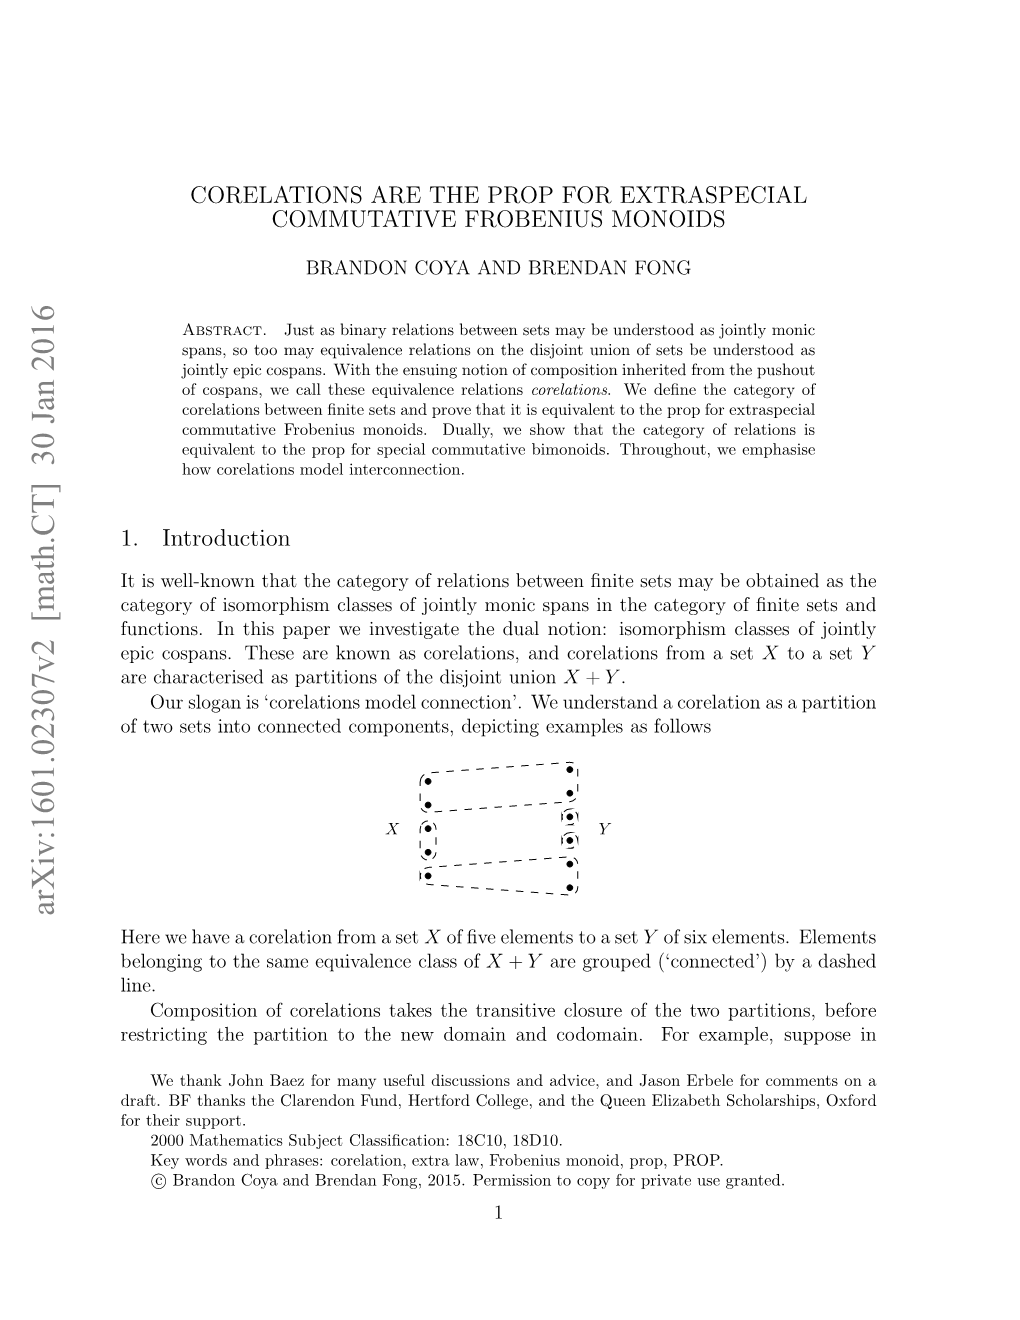 Corelations Are the Prop for Extraspecial Commutative